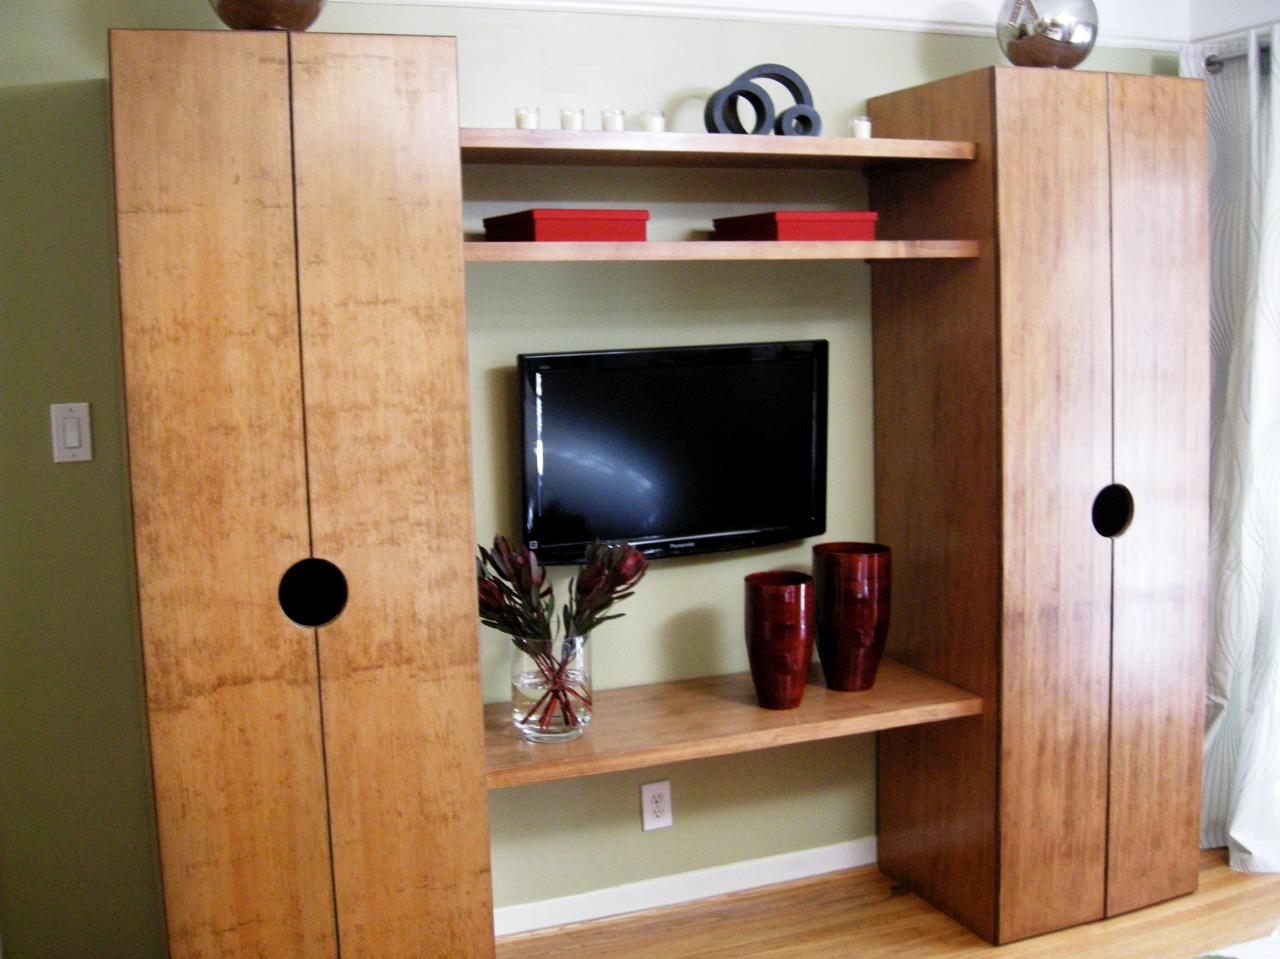 How To Build A Wardrobe Tower Hgtv